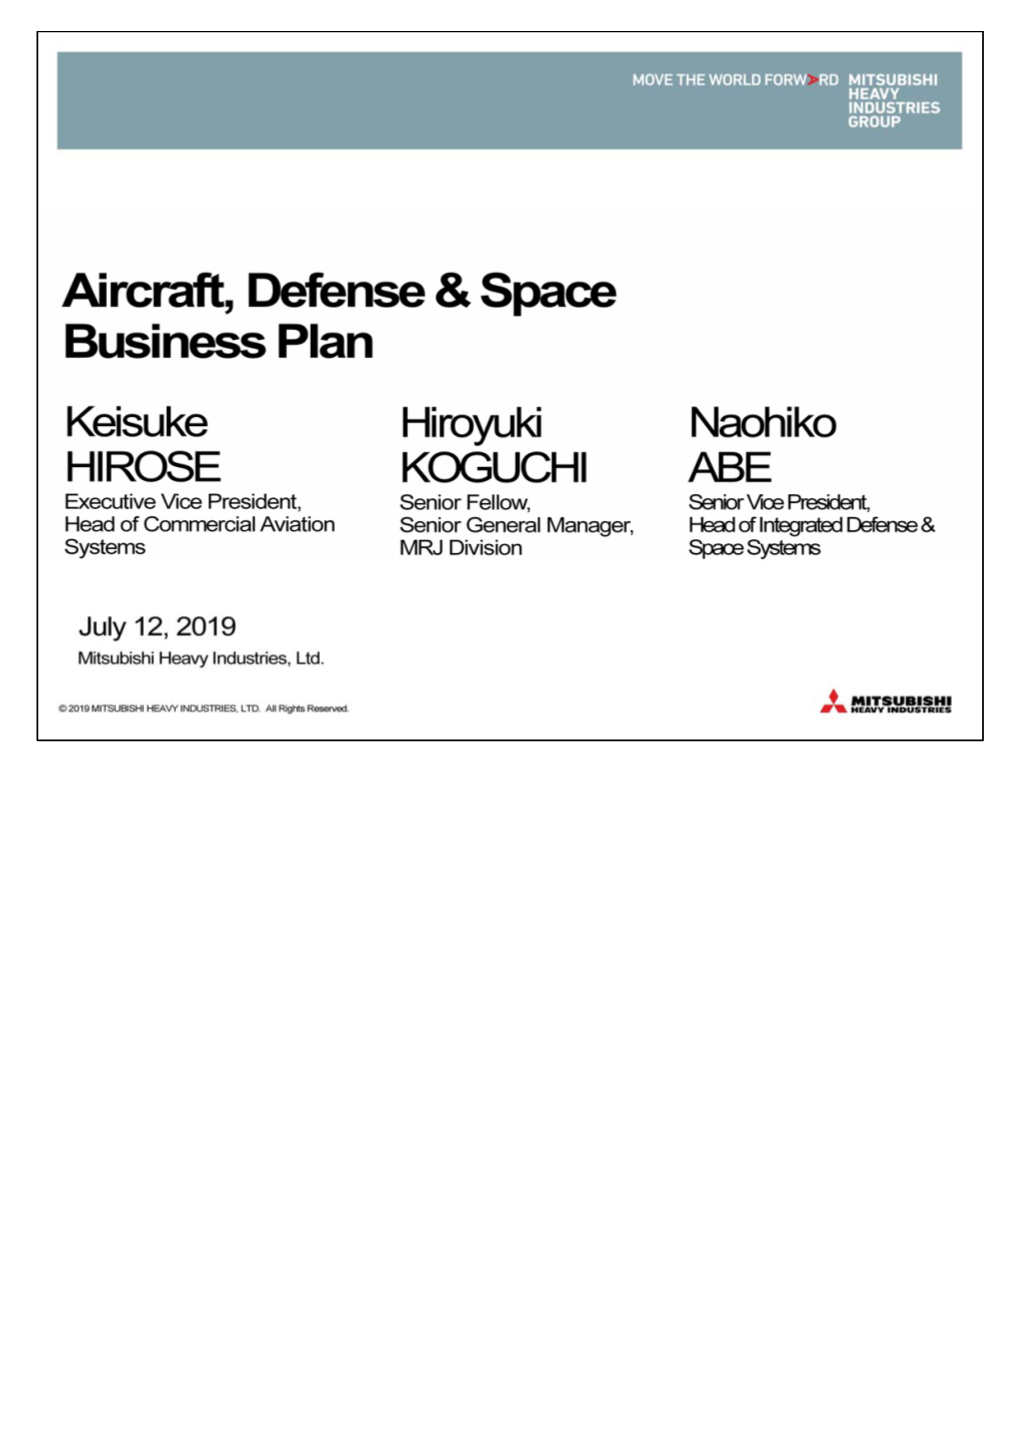 Aircraft, Defense & Space Business Plan